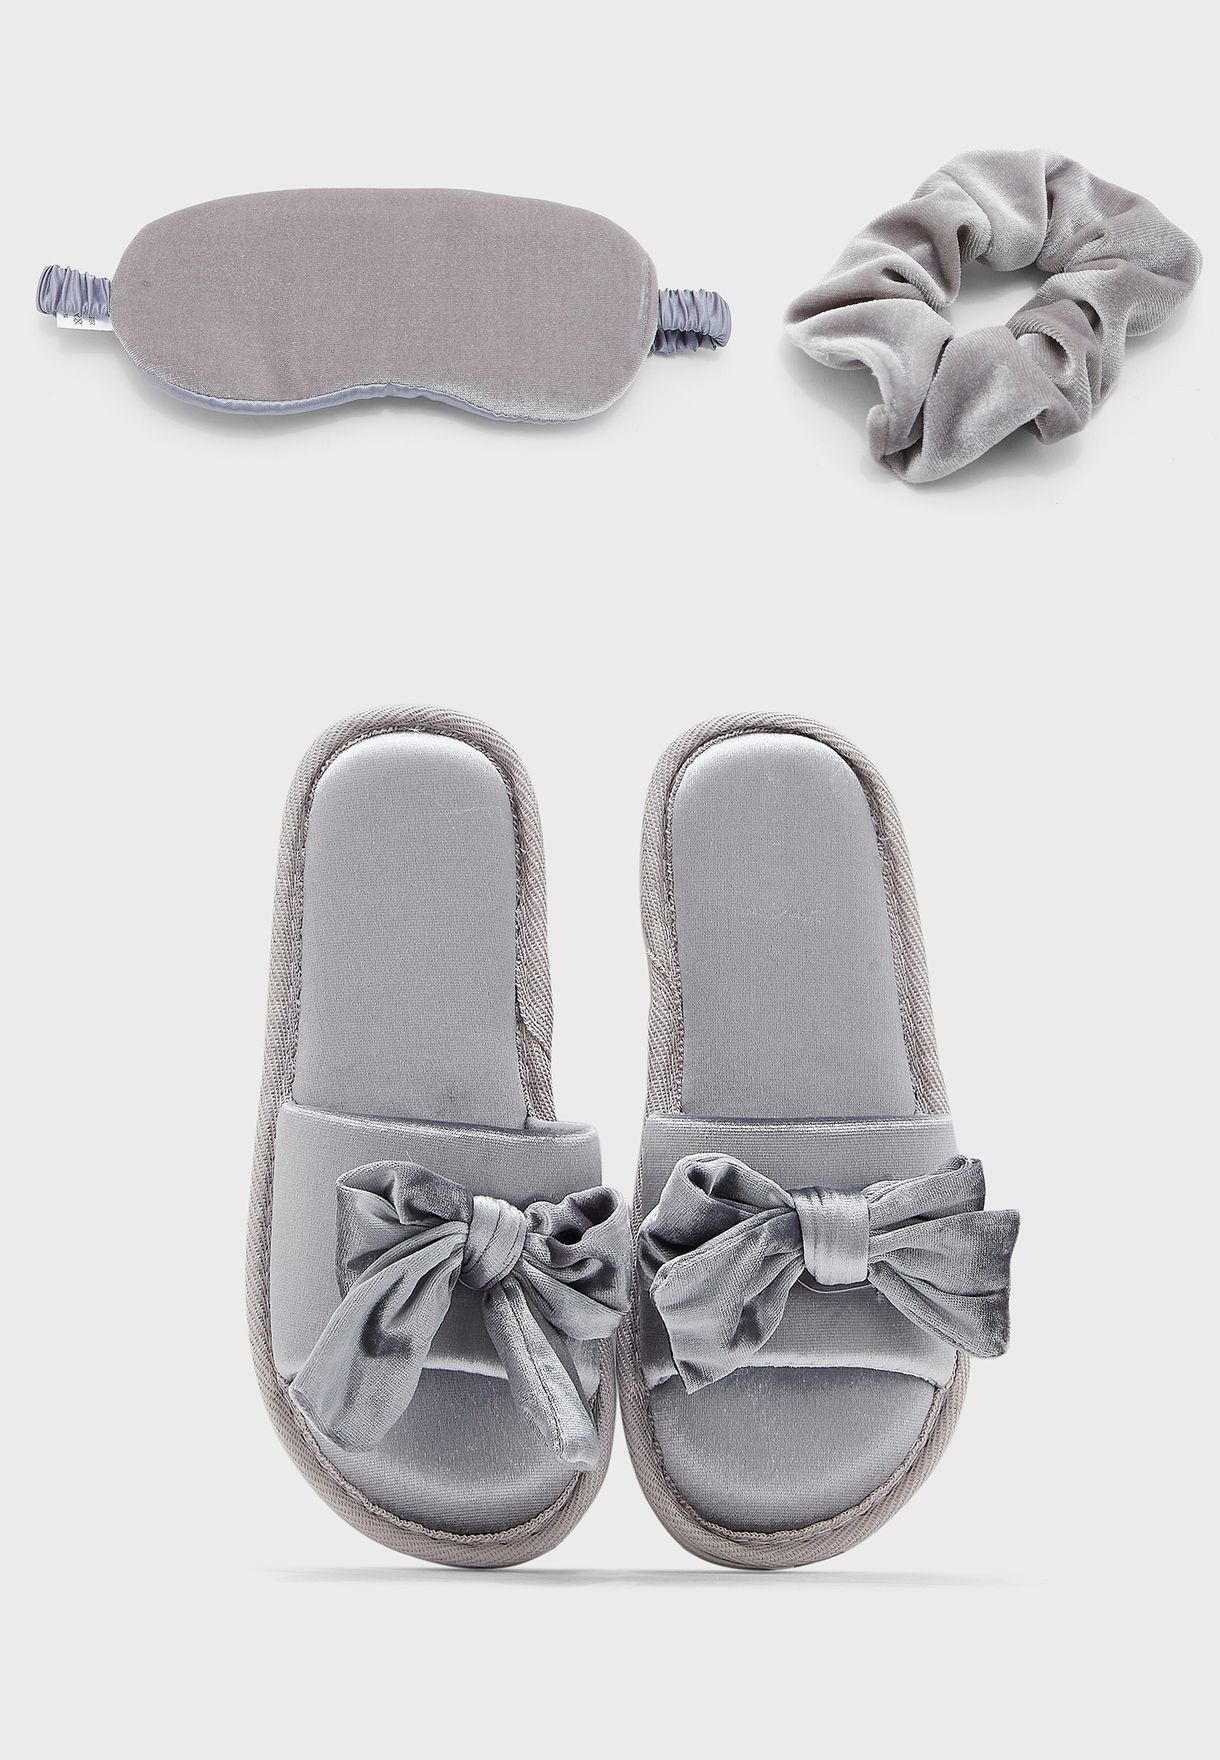 Silky Bedroom Slippers, Eye Cover And Scrunchie Gift Set 